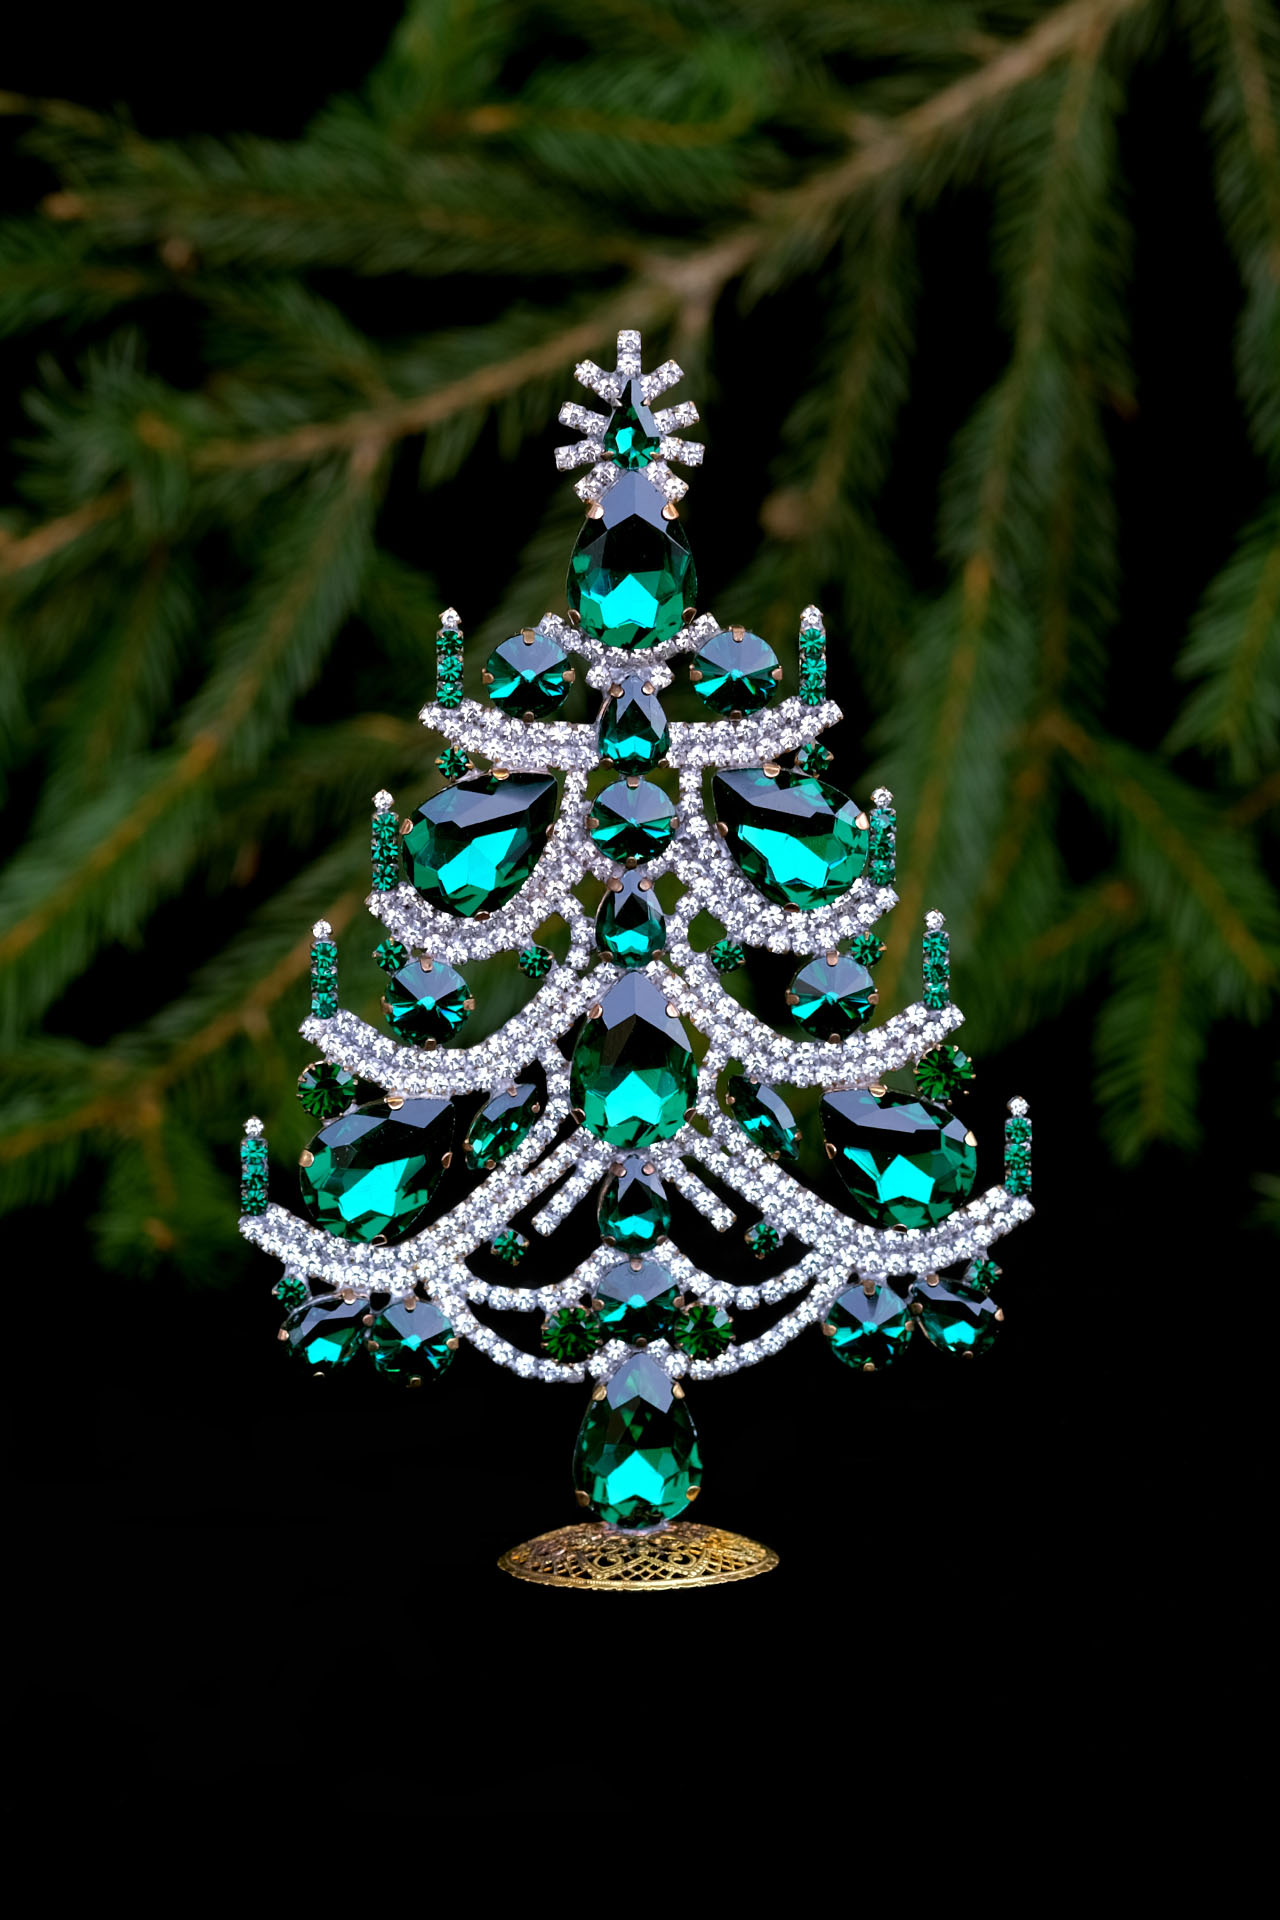 Charming Xmas tree - handcrafted with Christmas ornaments